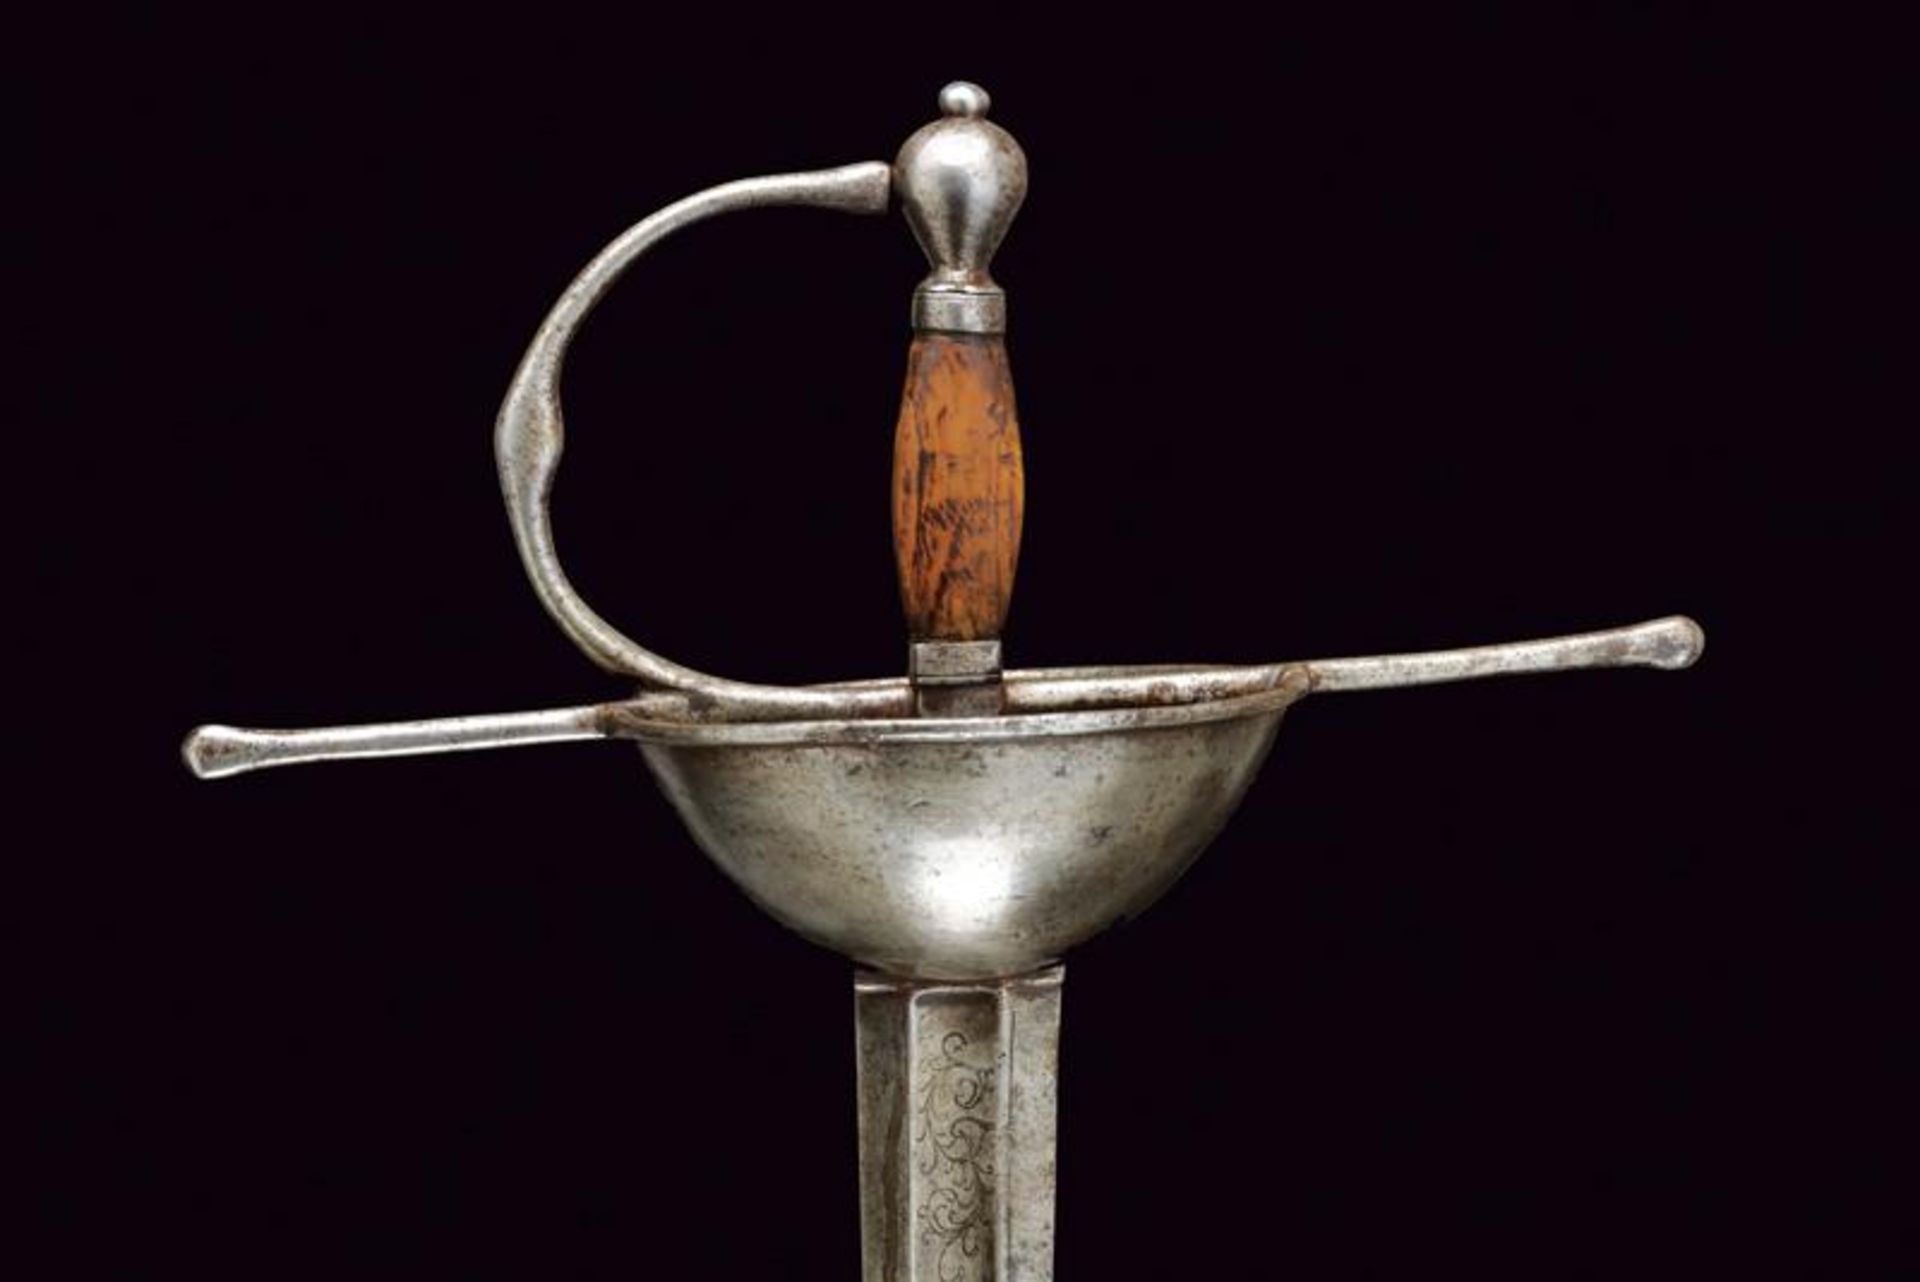 A cup hilted sword - Image 3 of 5